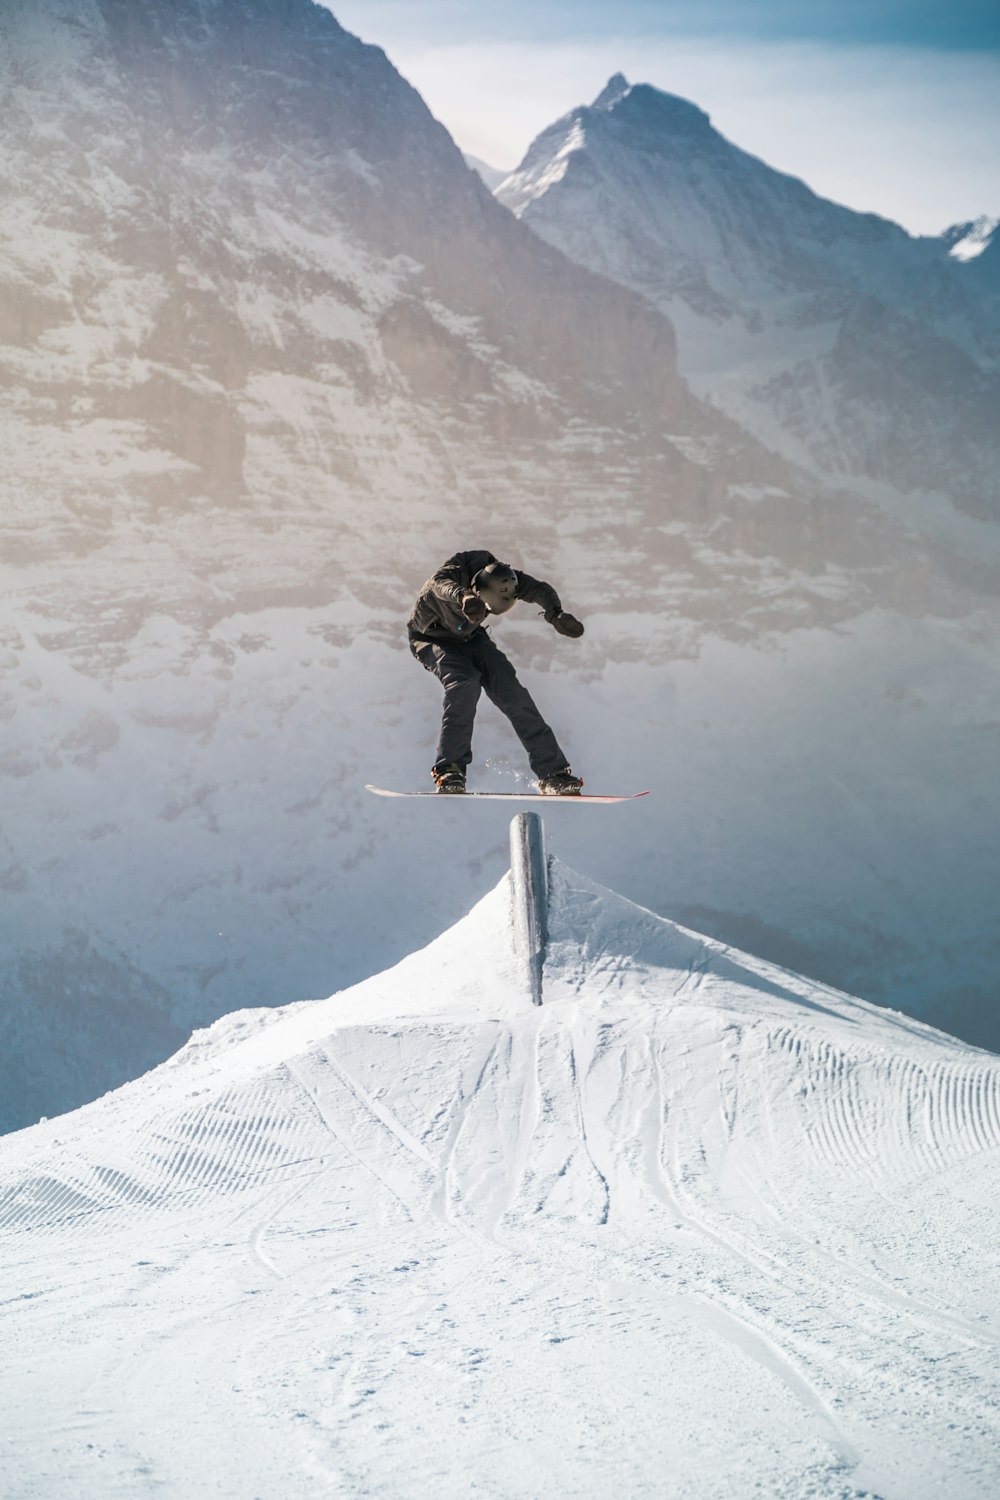 man in black jacket and black pants riding on snowboard during daytime